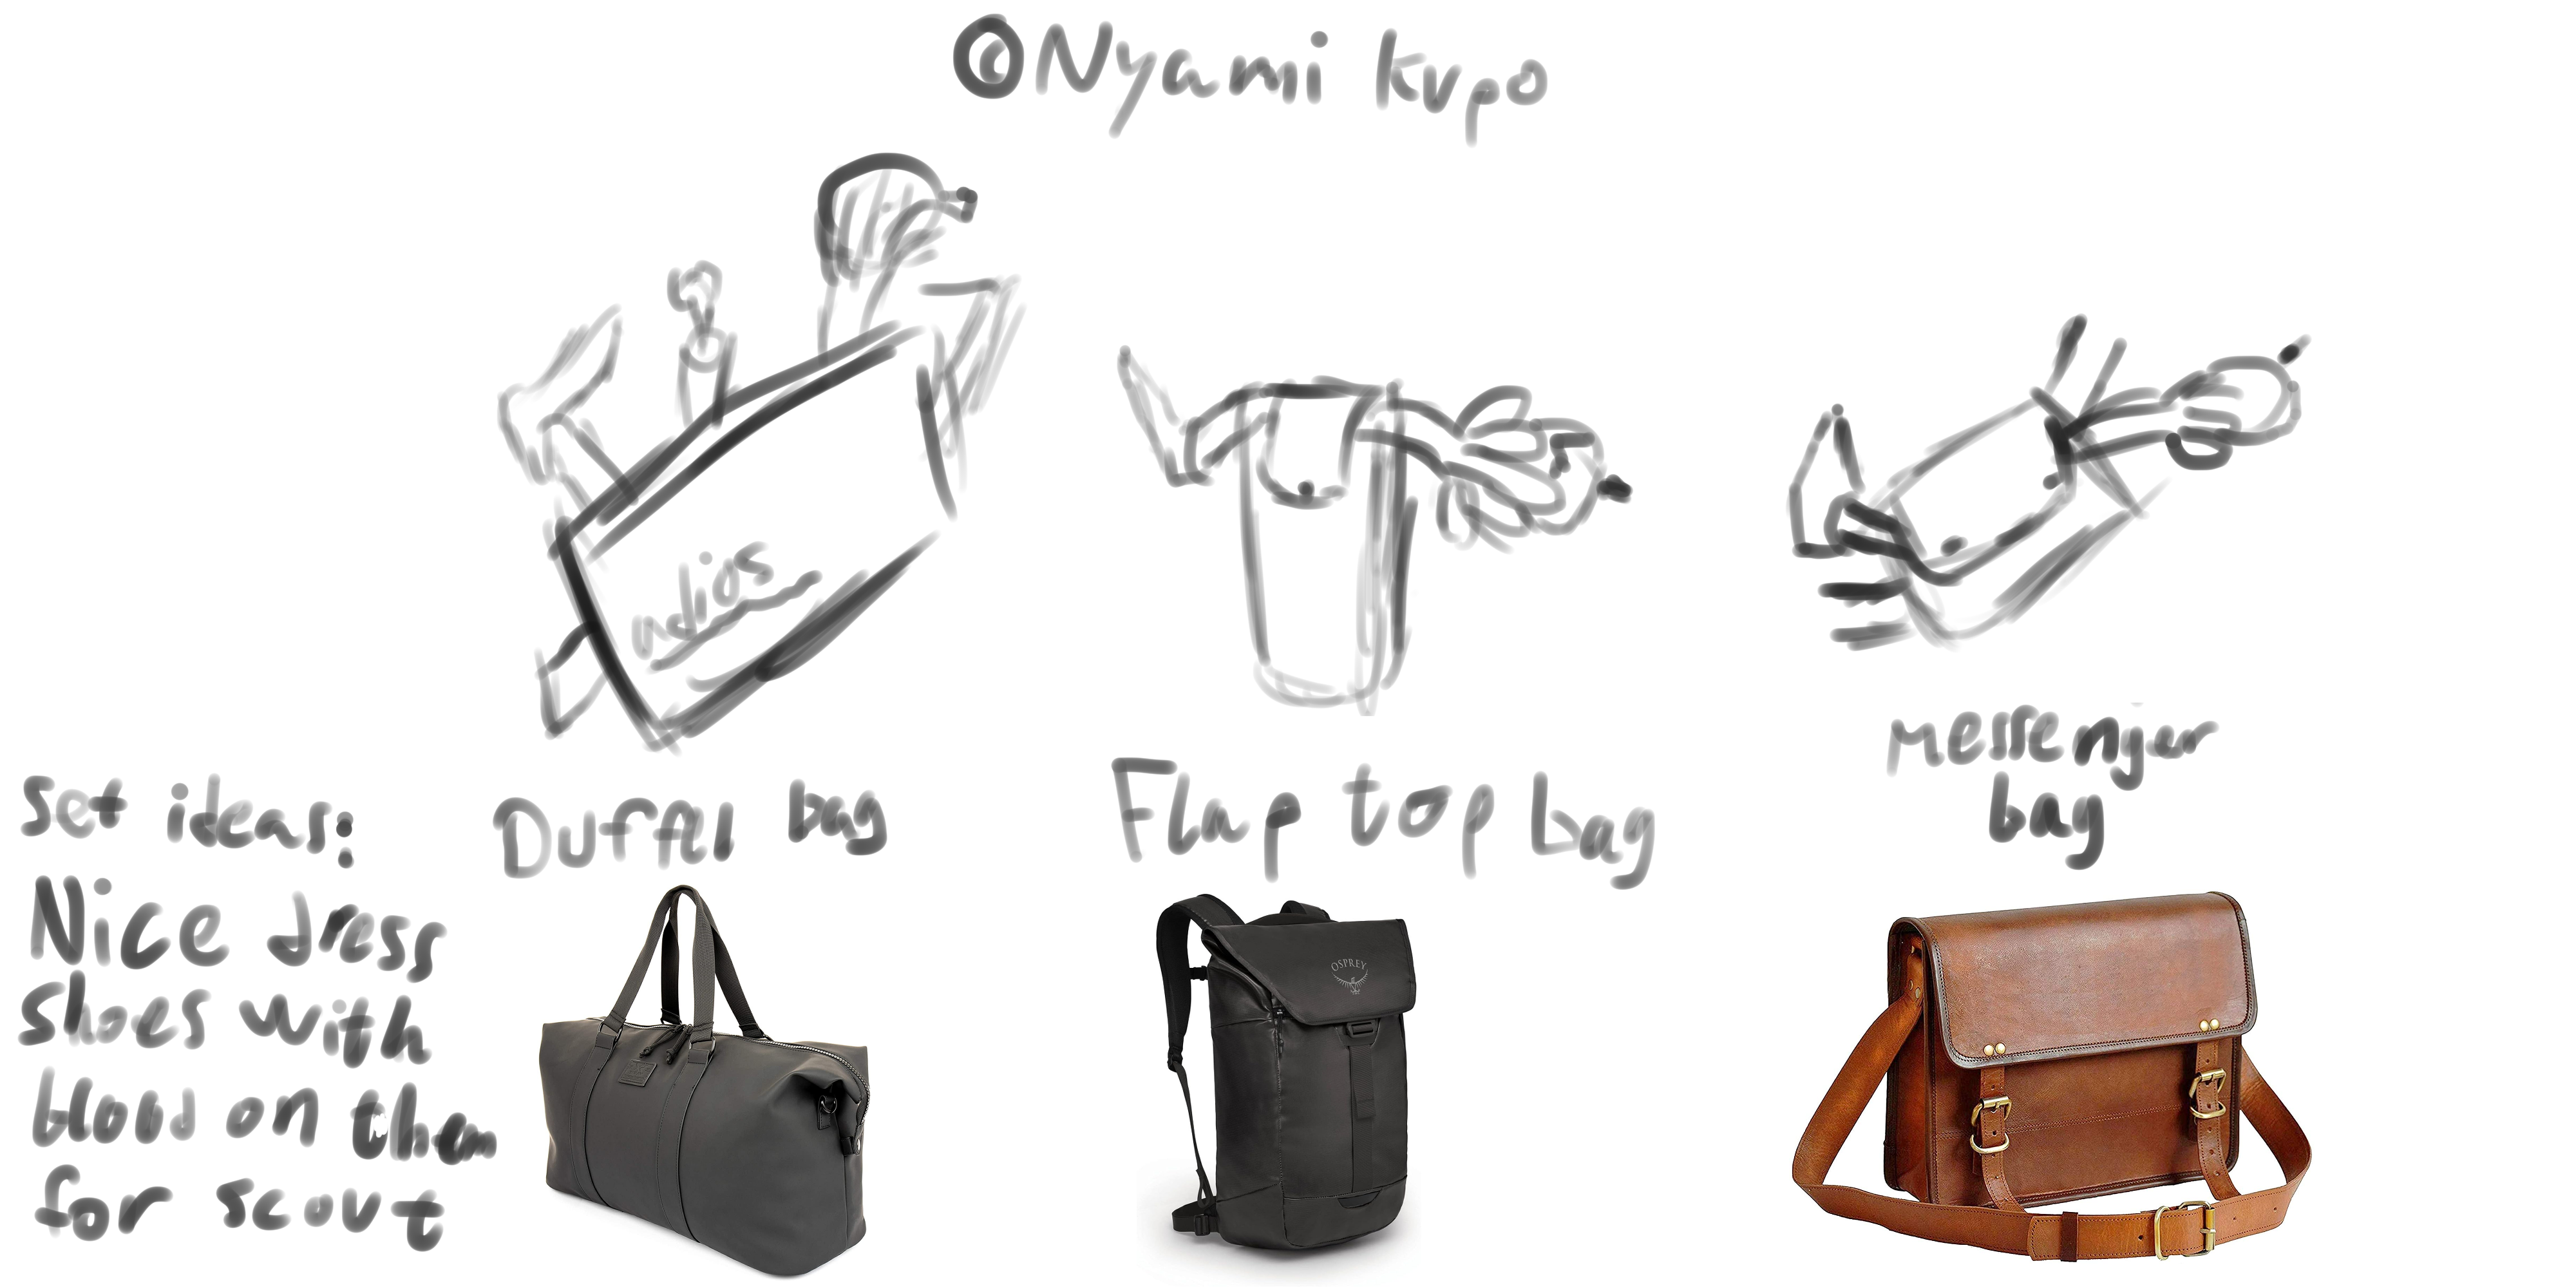 the buddy bag concept.png